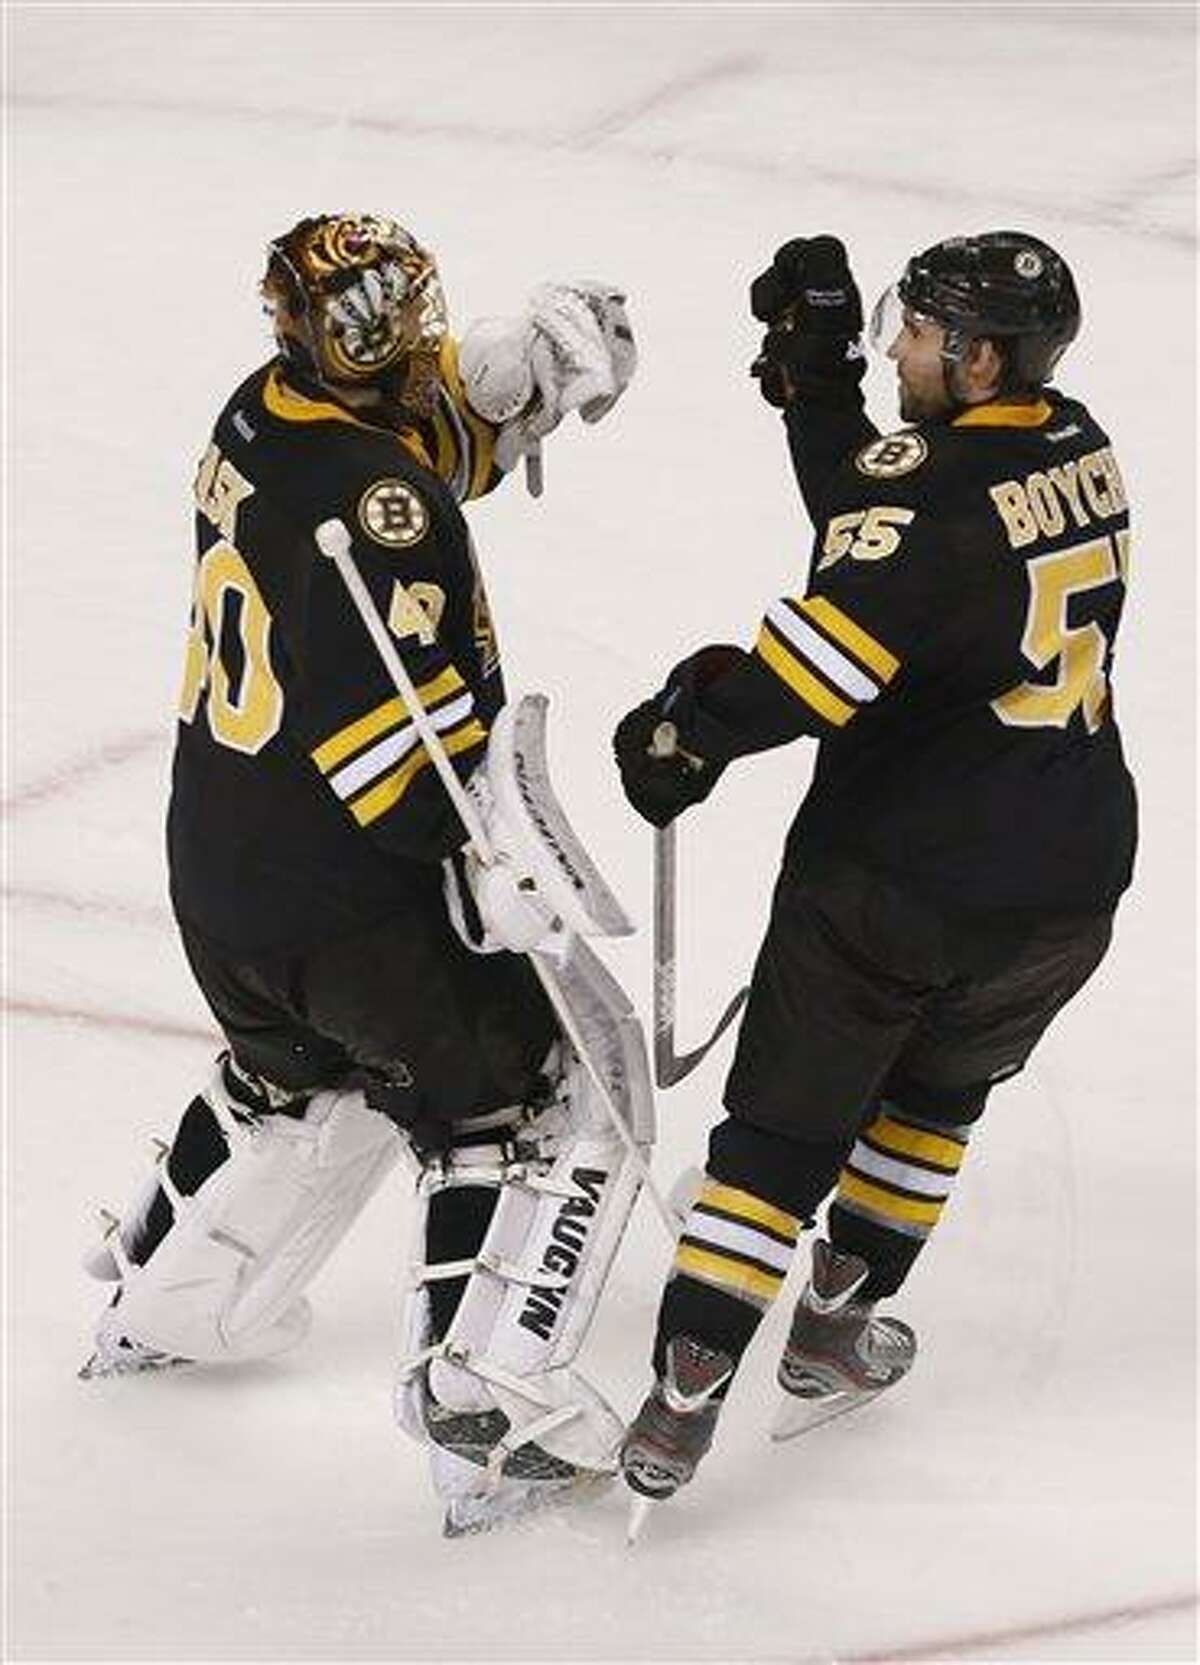 NHL: Boston Bruins take down the New Jersey Devils in a shootout